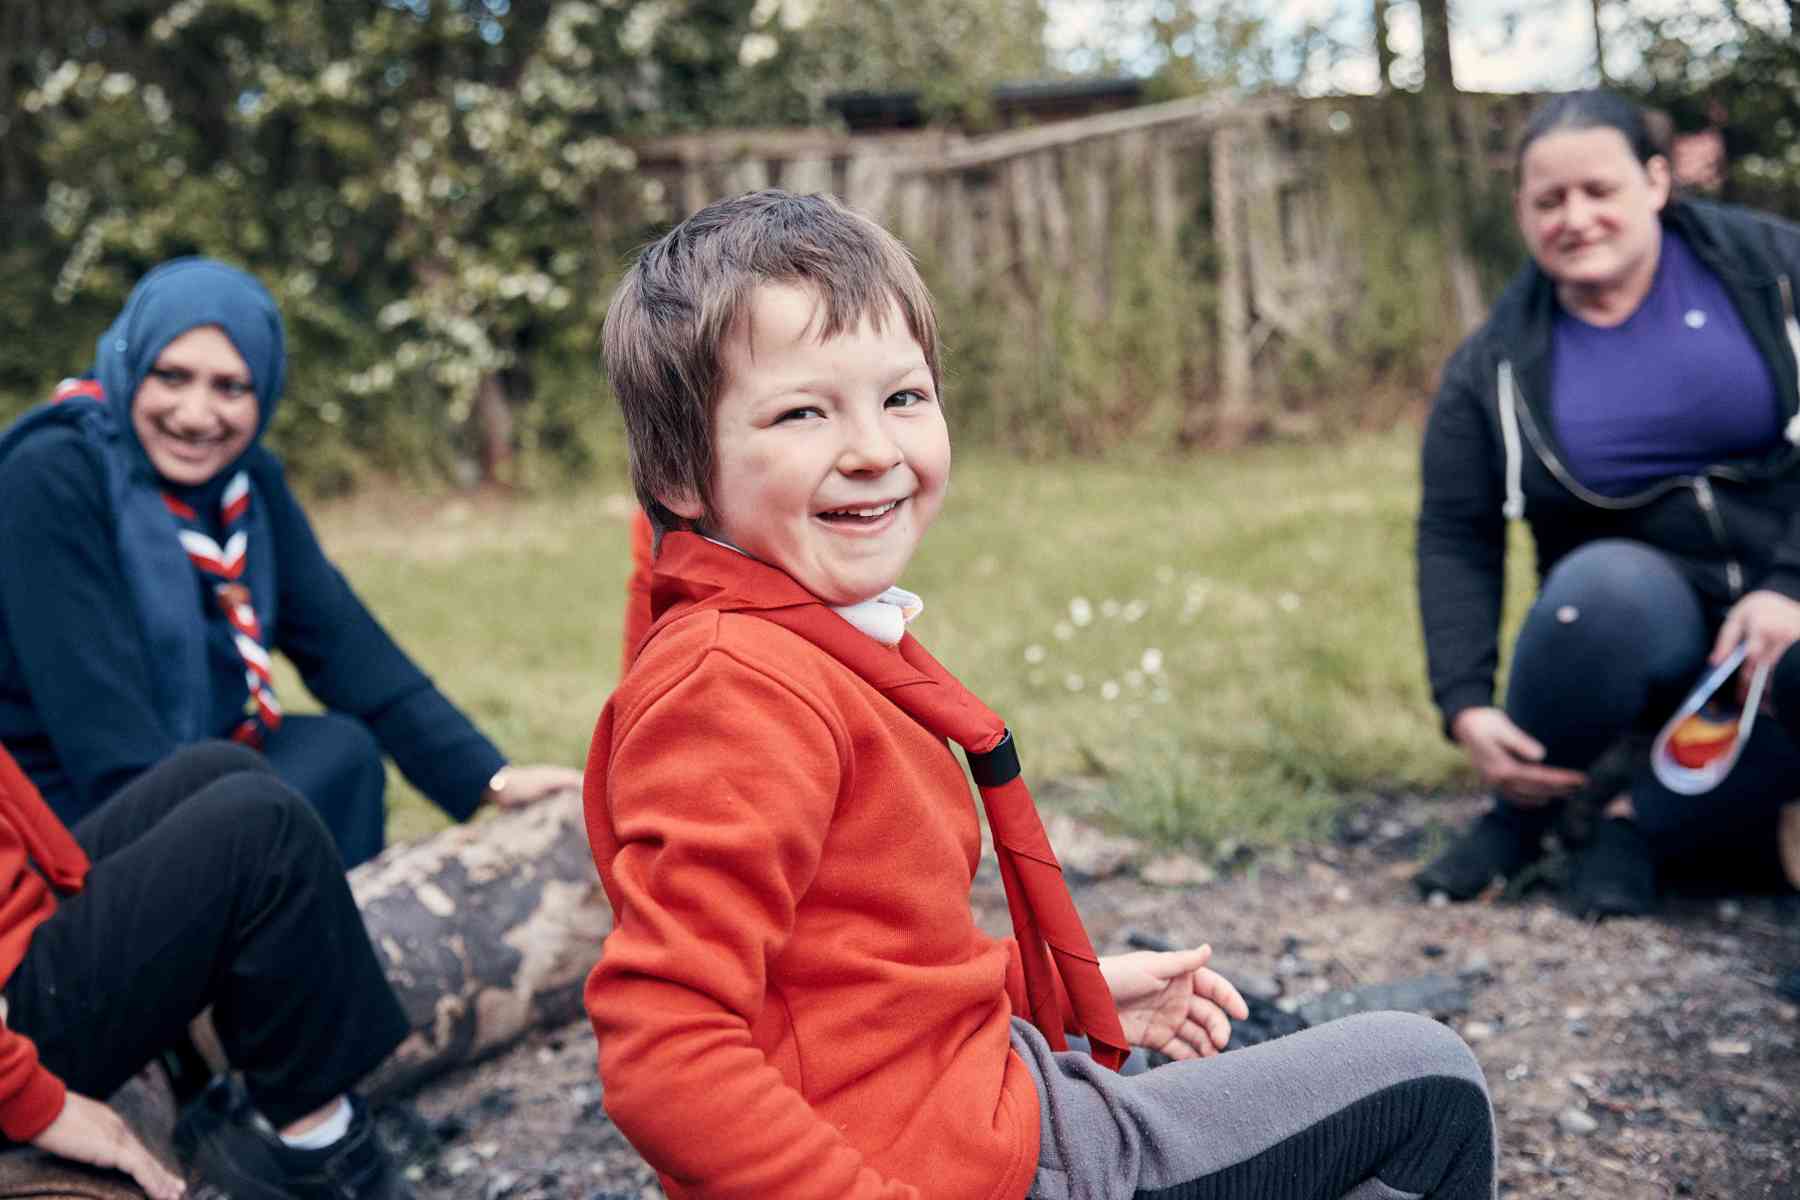 A young person, wearing a red jumper, smiles at the camera while two volunteers sit behind